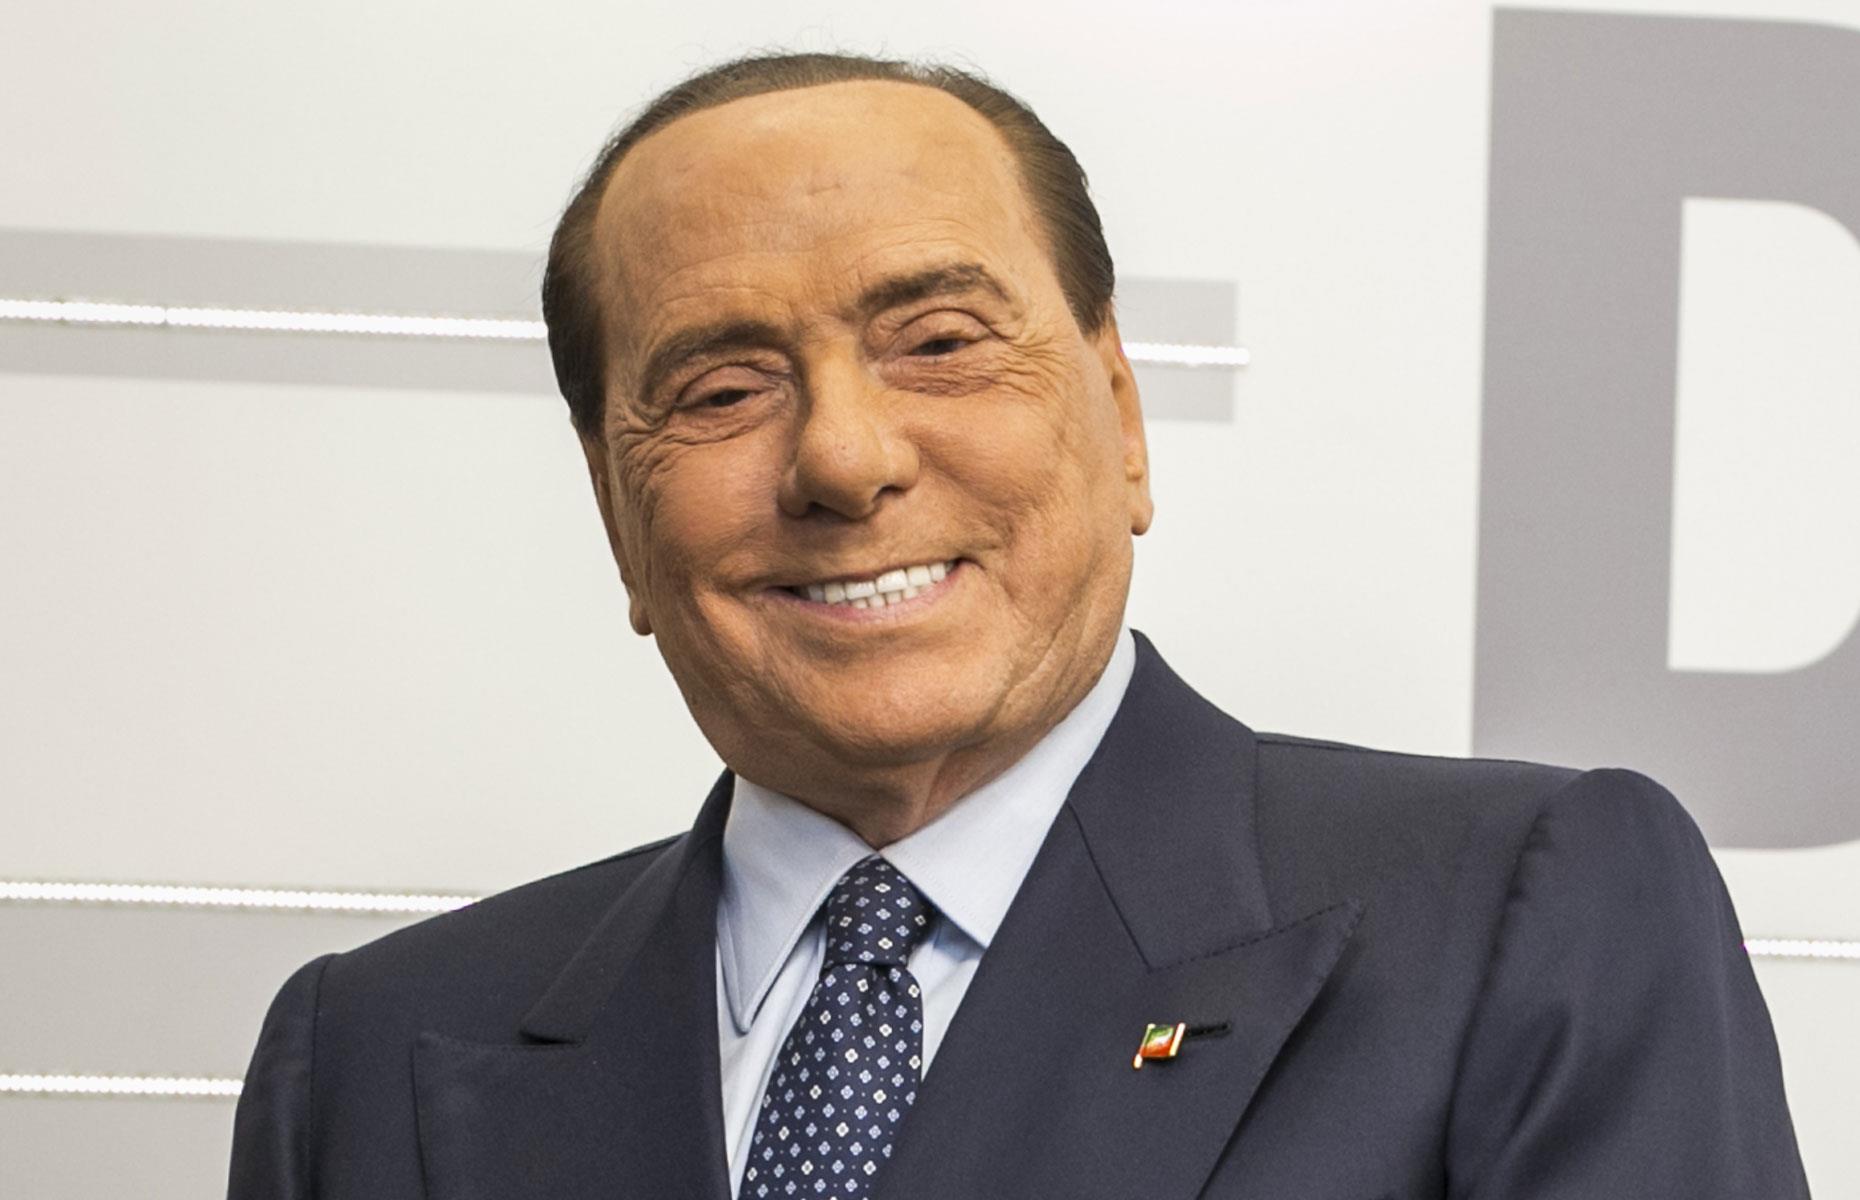 Italy's prime minister for three terms in the 1990s, 2000s and 2010s, Silvio Berlusconi began his career in construction but entered the world of media in 1973 where he made his fortune. The former owner of AC Milan and a convicted tax fraudster, Berlusconi's net worth peaked at $9 billion in 2014, but his family's fortune has since declined to a total of $5.3 billion.